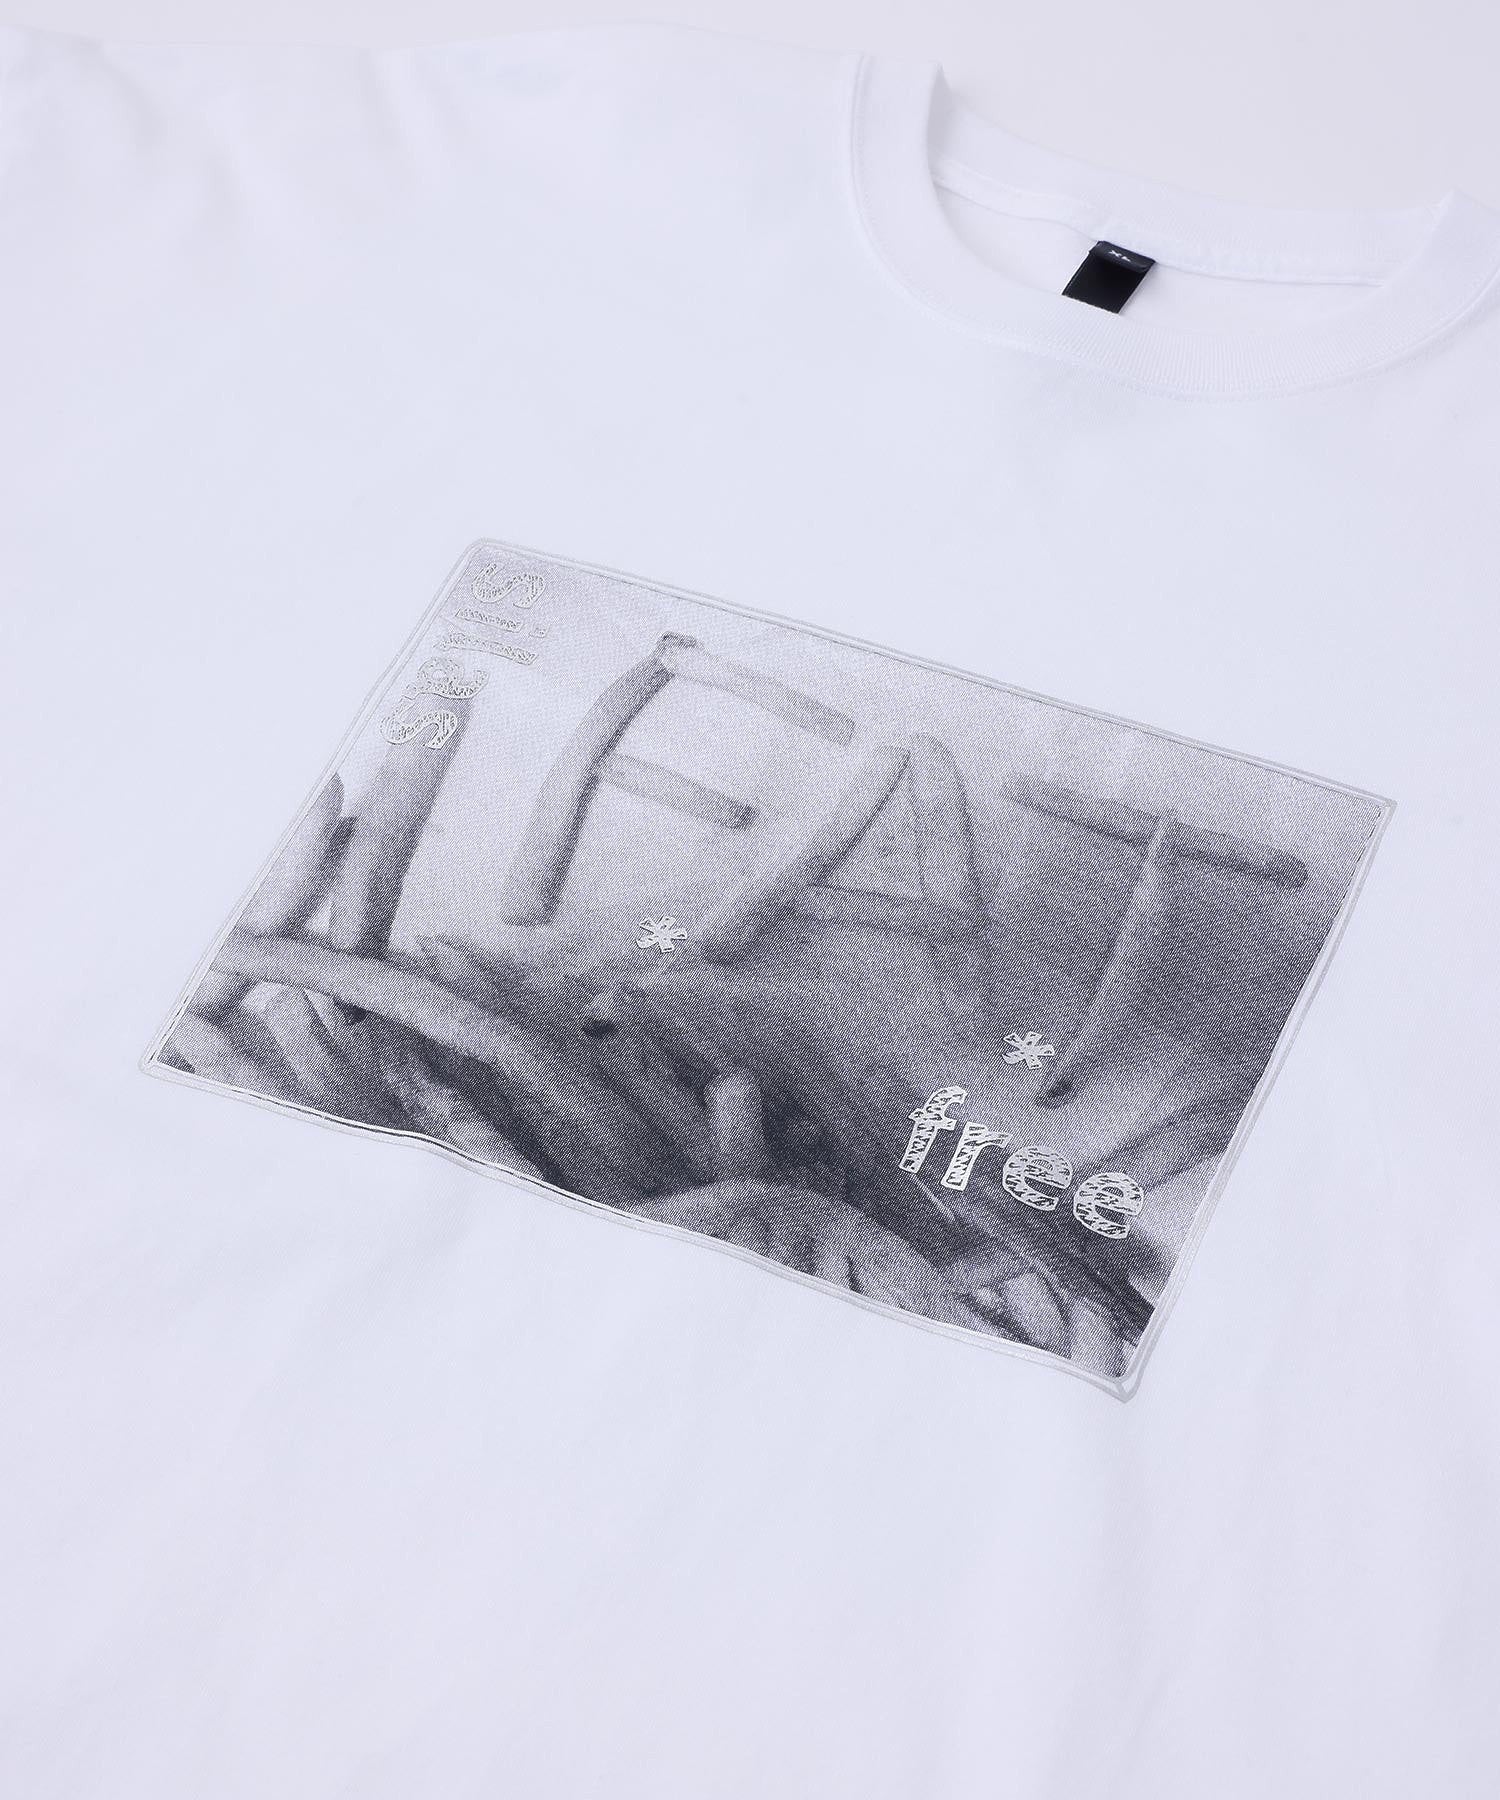 FAT FREE PHOTO PRINT WIDE S/S TEE SILAS